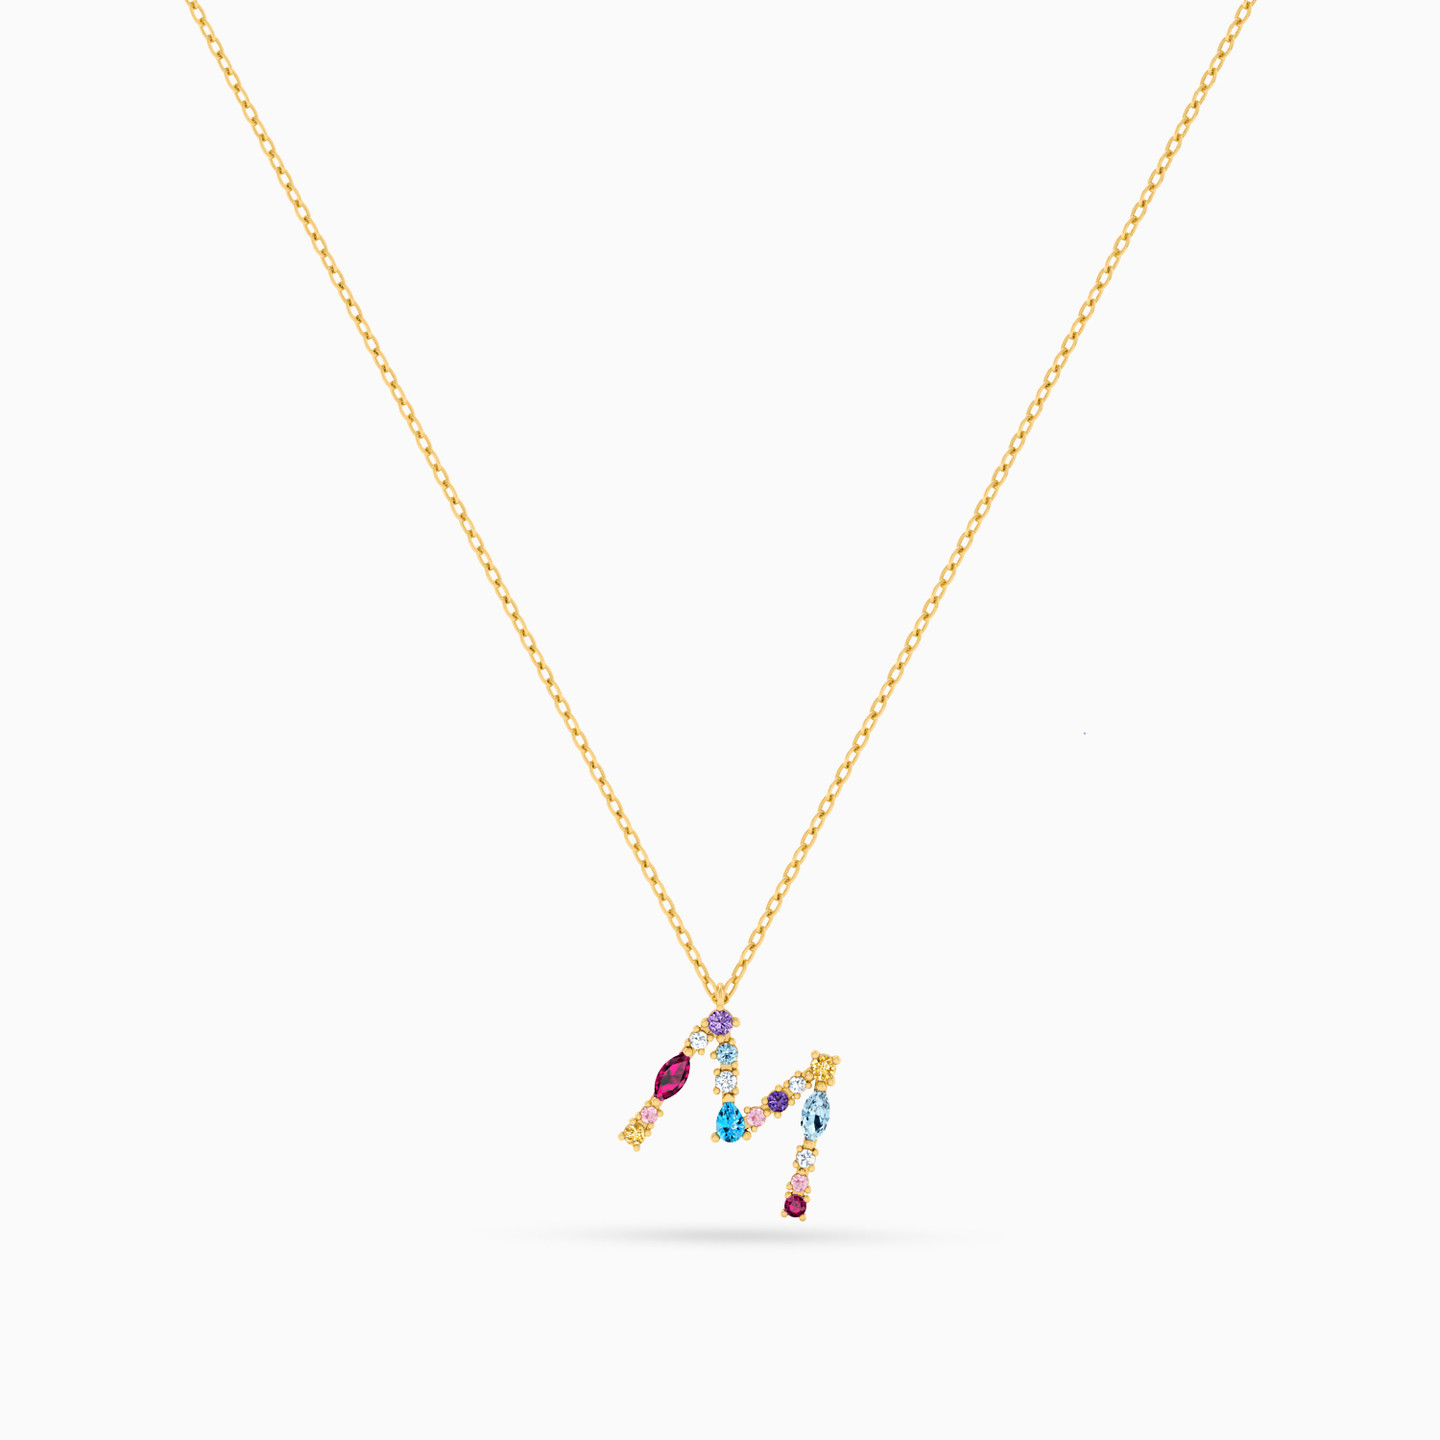 Letter M Shaped Colored Stones Pendant with 18K Gold Chain - 3